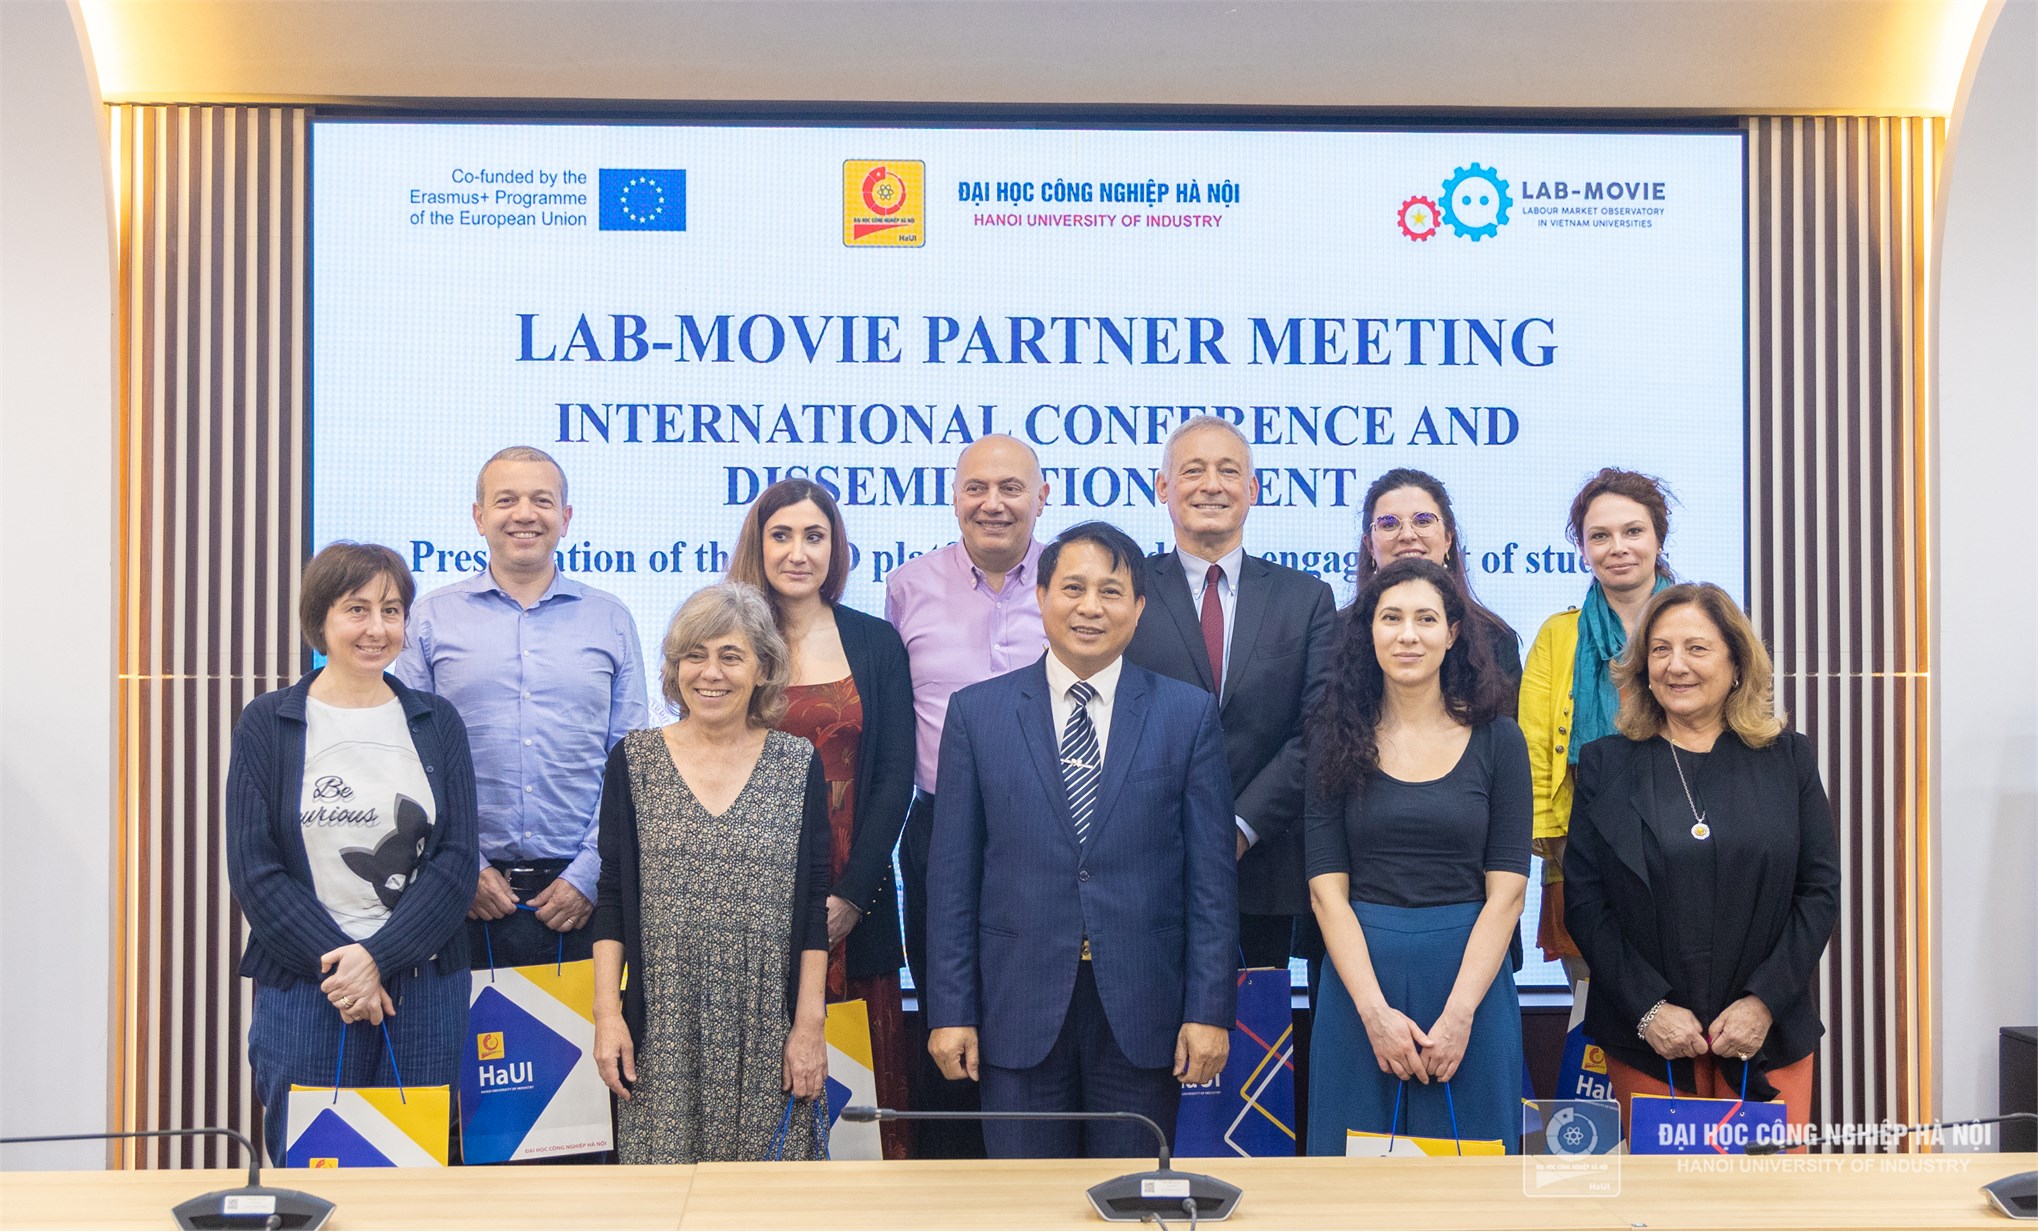 Lab–Movie: bridging the gap between academia and the Vietnamese labor market